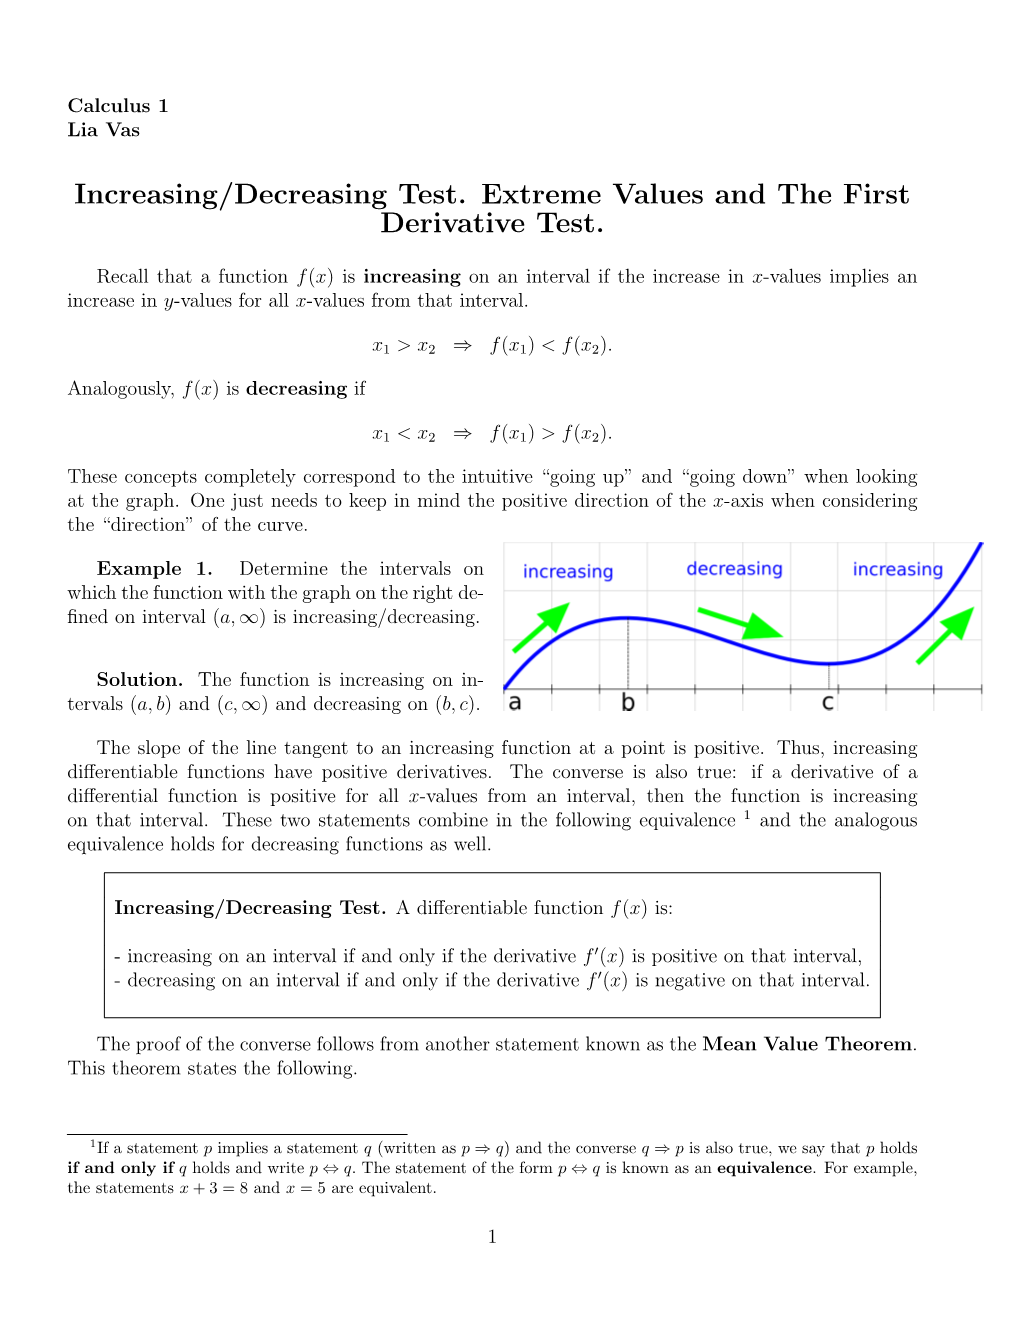 Increasing/Decreasing Test. Extreme Values and the First Derivative Test